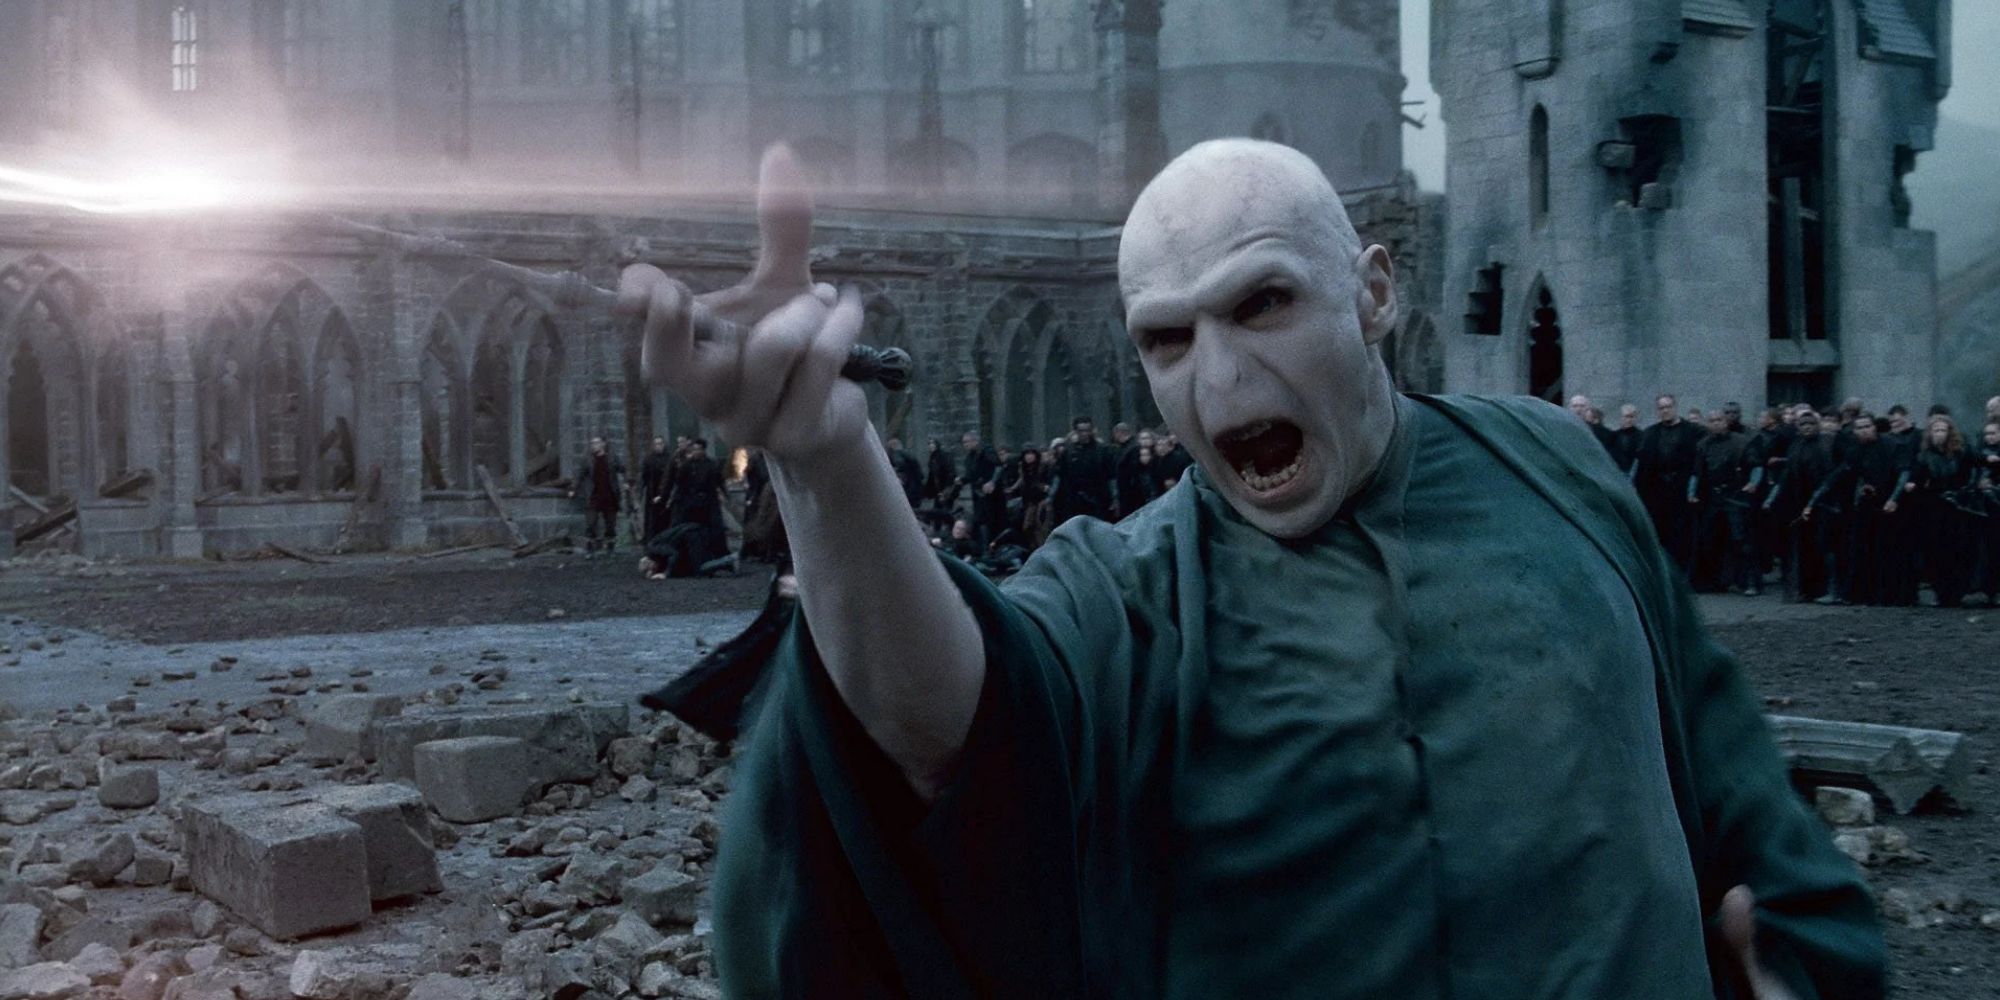 Voldemort (Ralph Fiennes) using the Elder Wand at the Battle of Hogwarts in 'Harry Potter and the Deathly Hallows: Part 2'